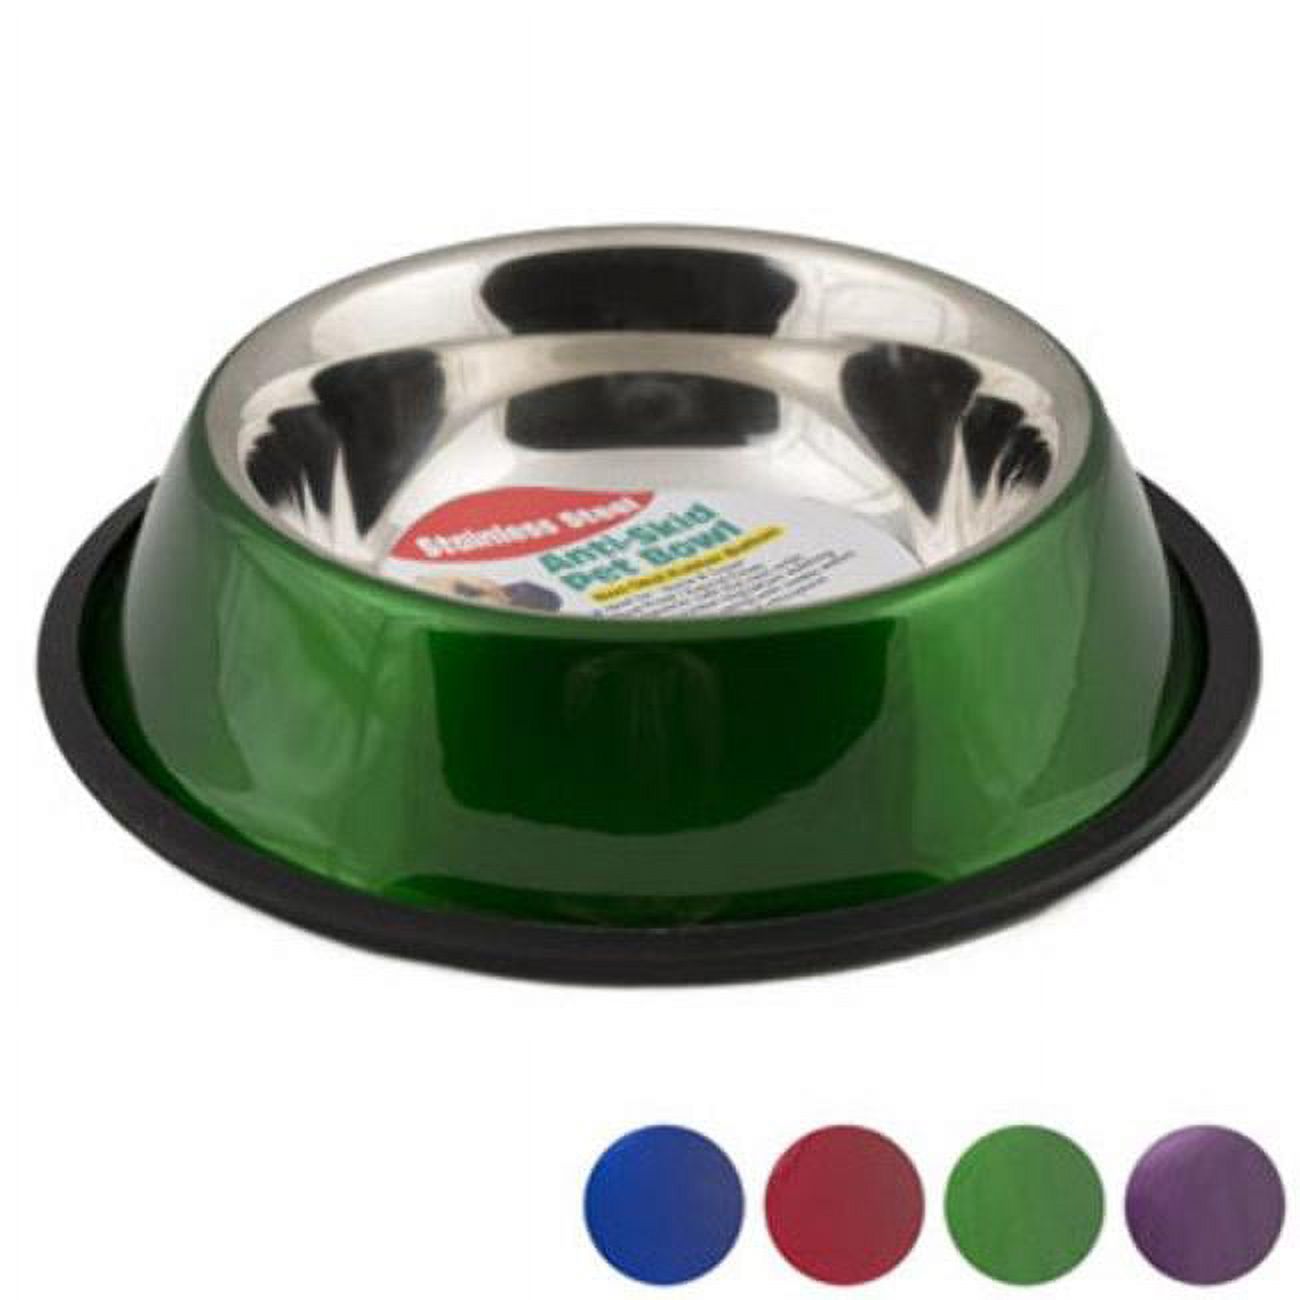 2324880 32 Oz Color Stainless Steel Pet Bowl, Assorted Color - Case Of 24 - 24 Per Pack